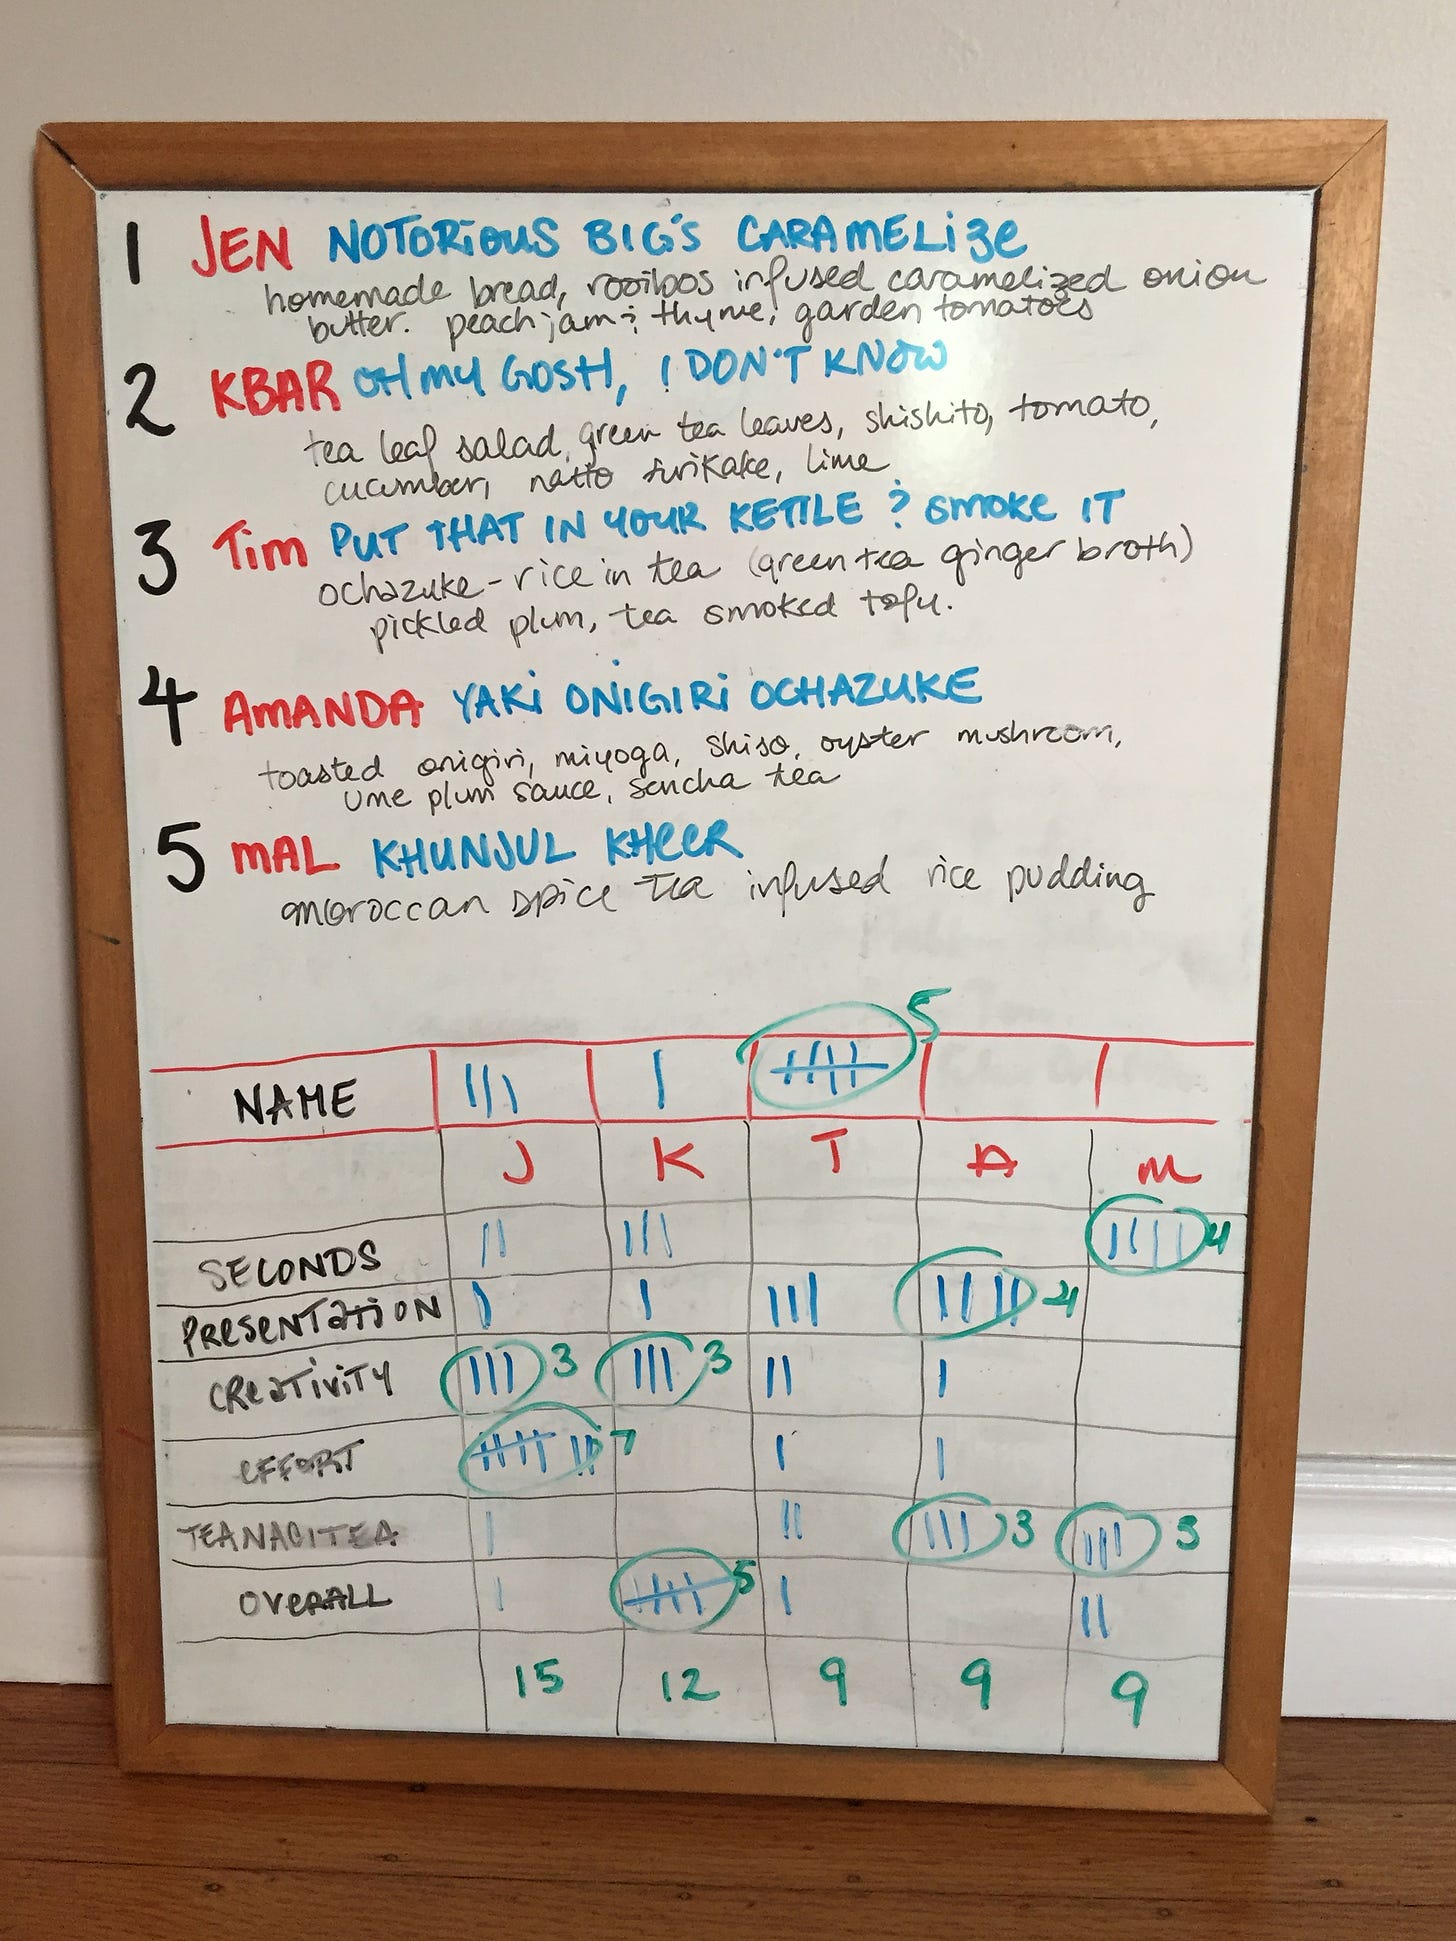 A whiteboard showcasing the scoresheet from the tea cookoff. A list of entries is at the top, and the categories for scoring are at the bottom.